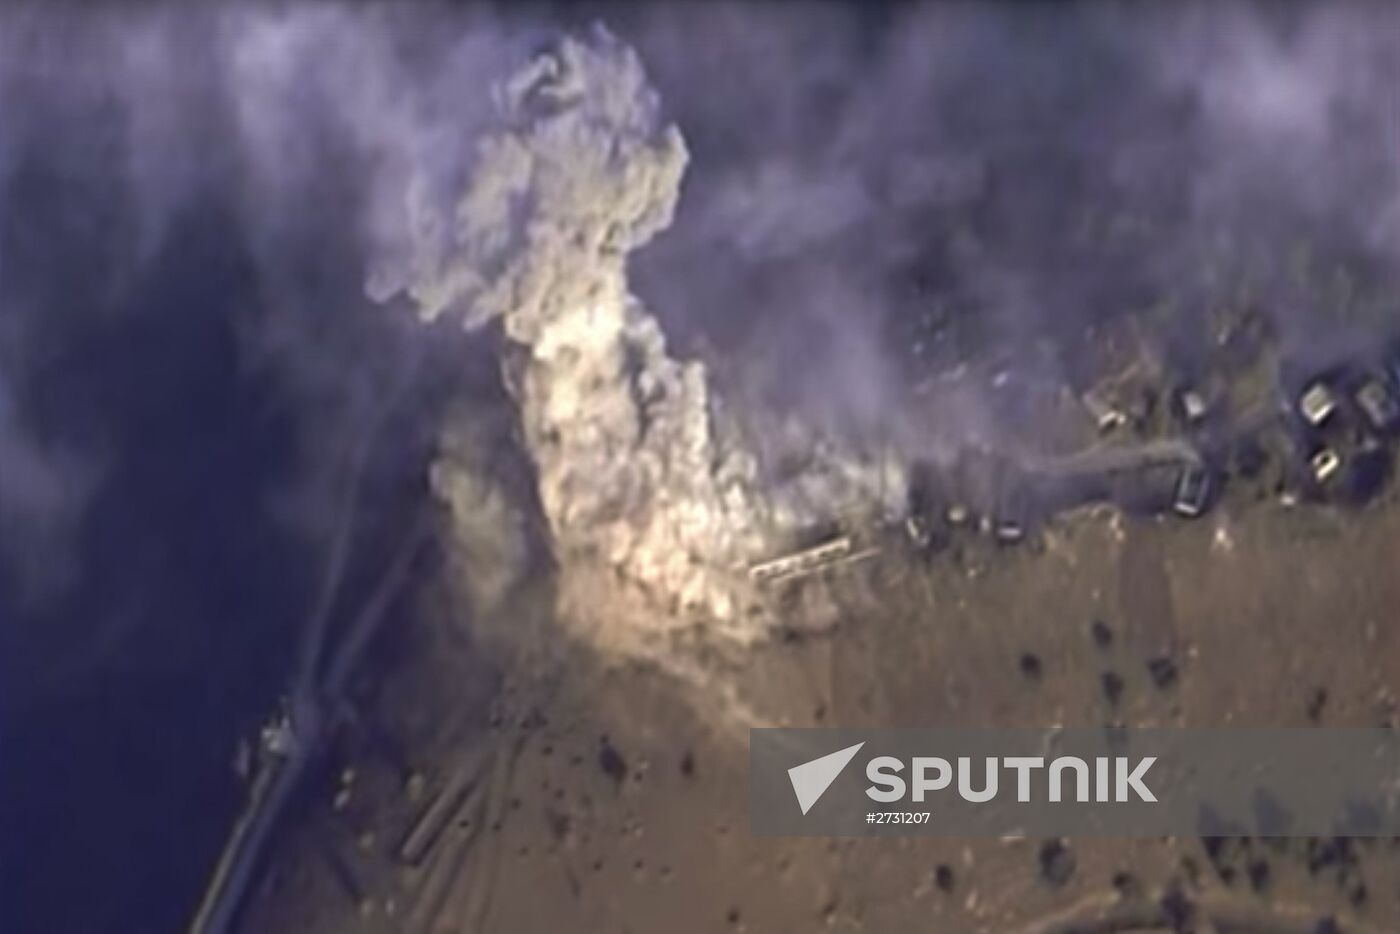 Russian Aerospace Forces' strikes on ISIS positions in Syria